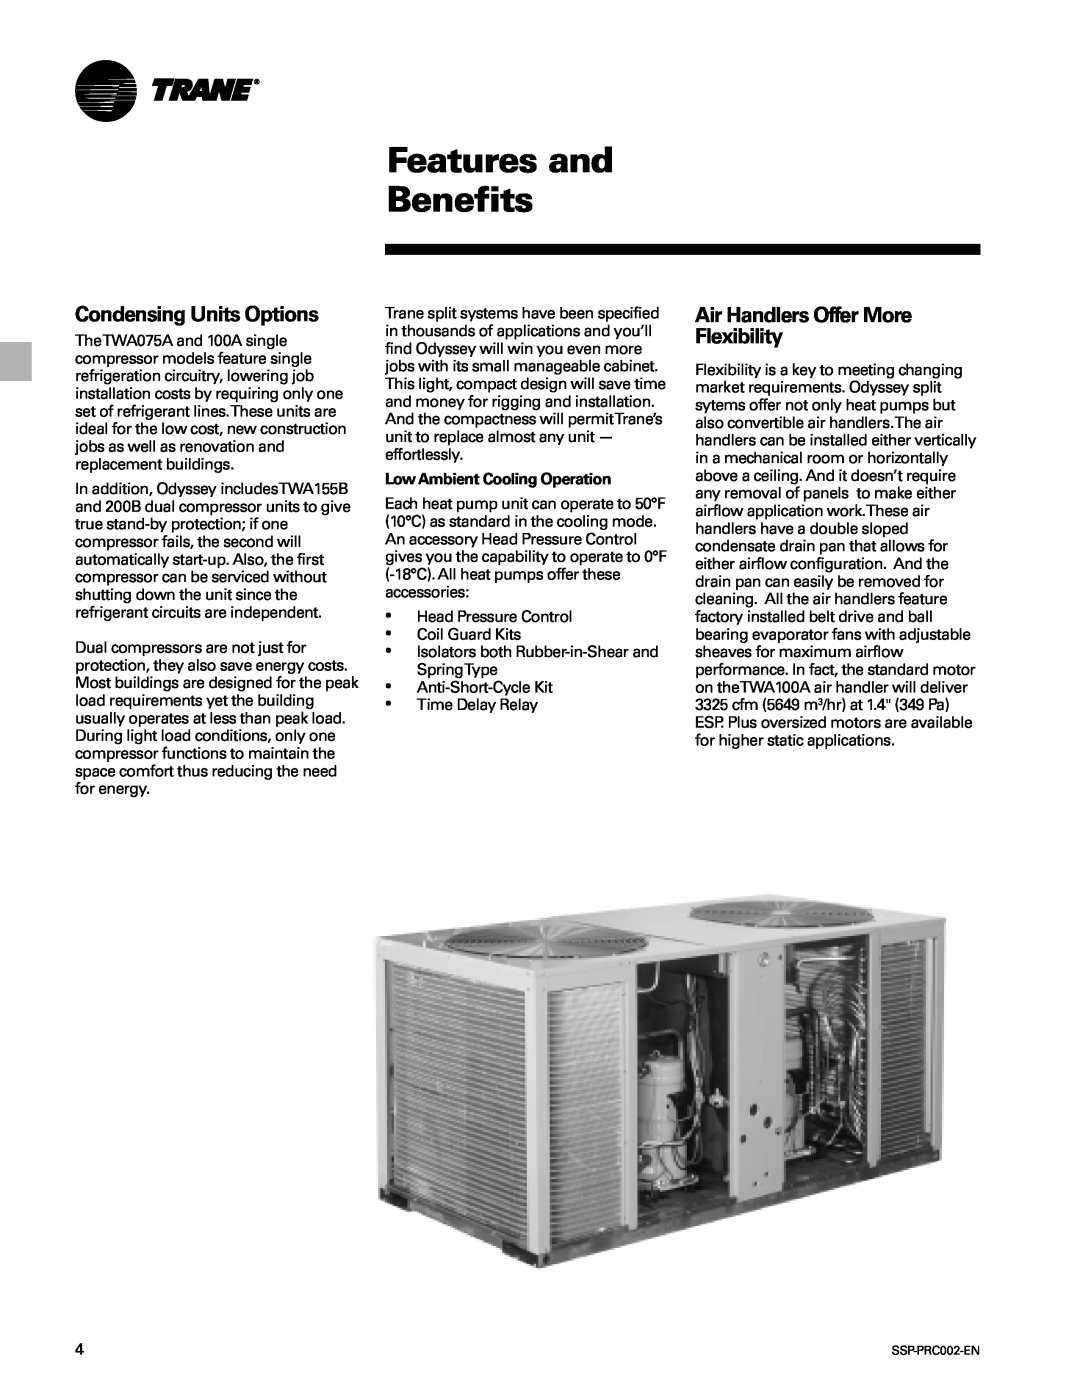 Trane TWA075A, TWE200B, TWA200B manual Features and Benefits, Condensing Units Options, Air Handlers Offer More Flexibility 